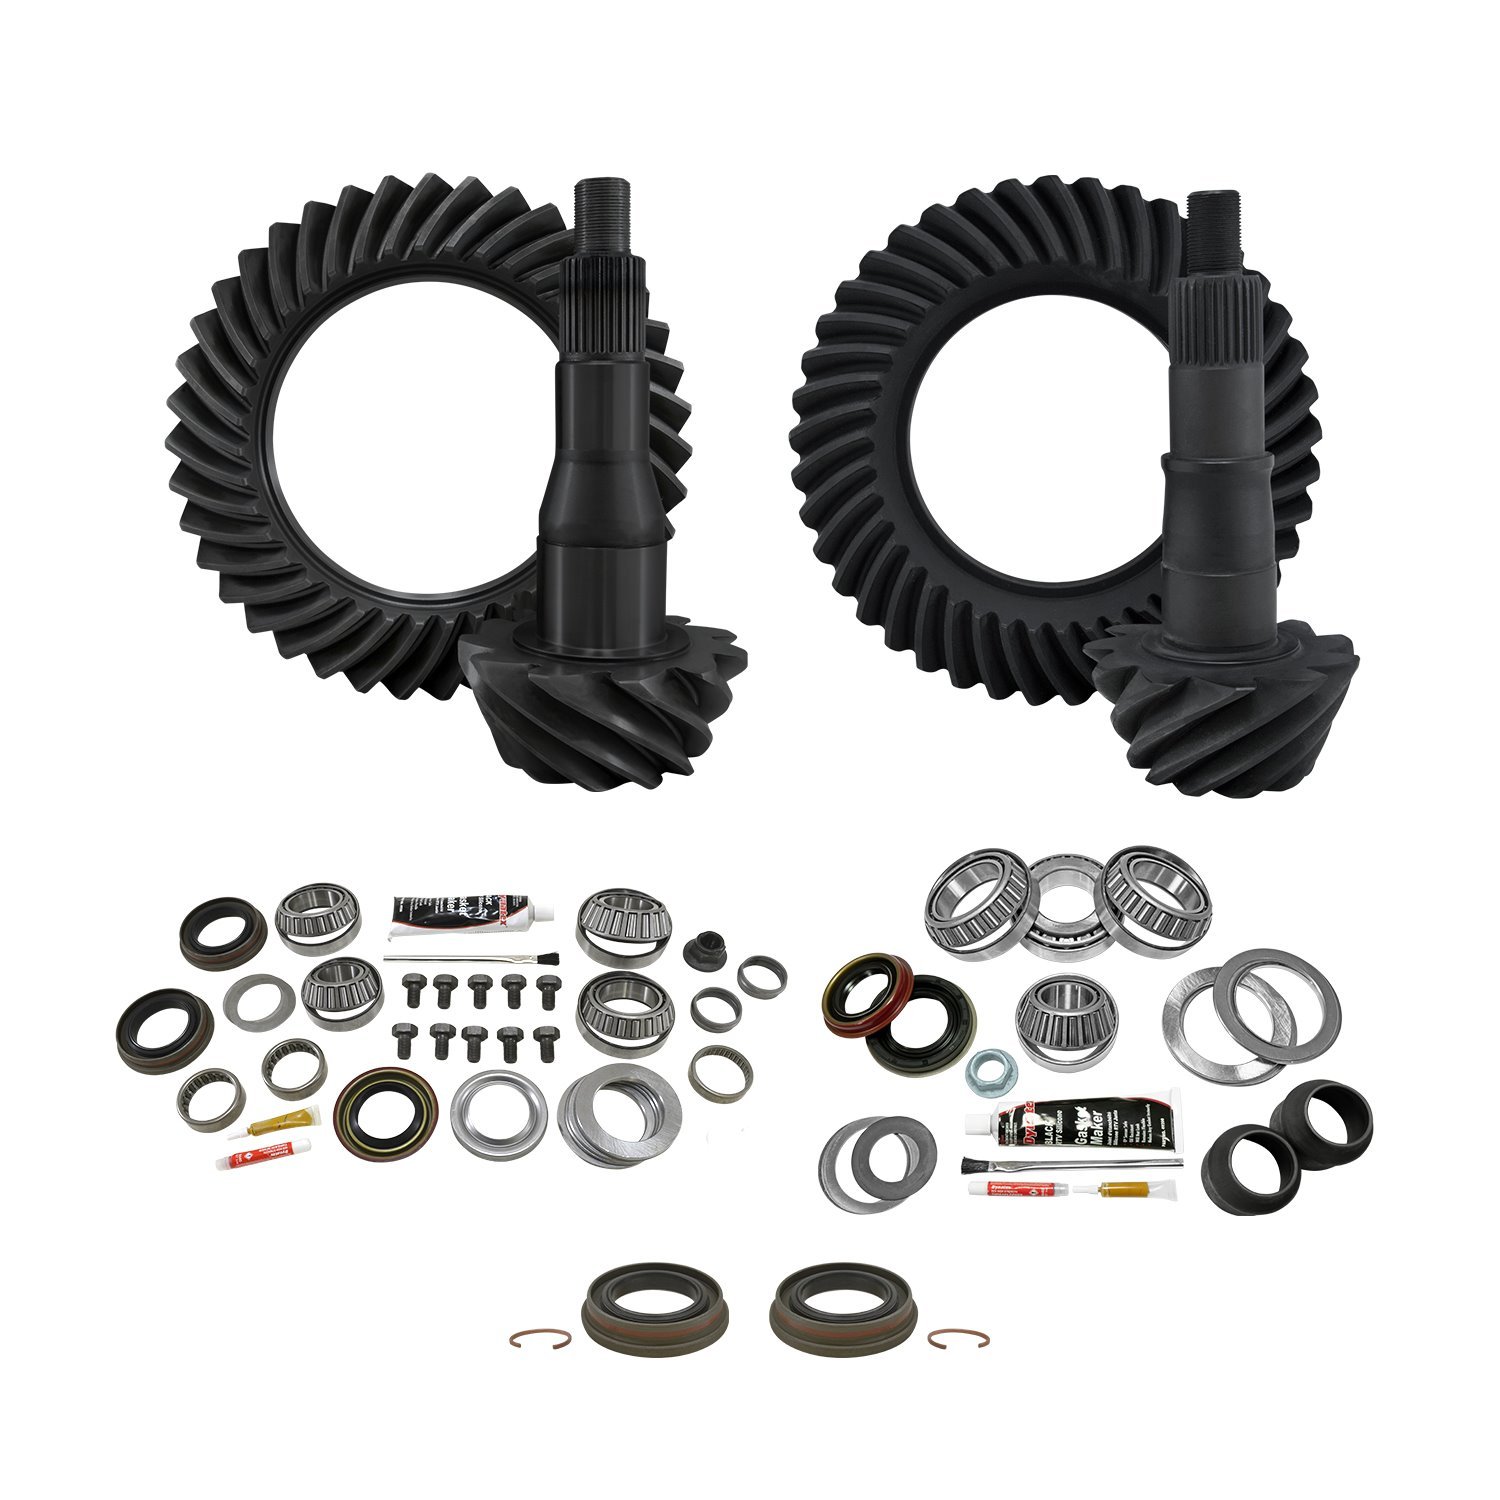 Re-Gear & Installation Kit, Ford 9.75 in., 2000-2010 F150, 3.73 Ratio, Fr&Rr